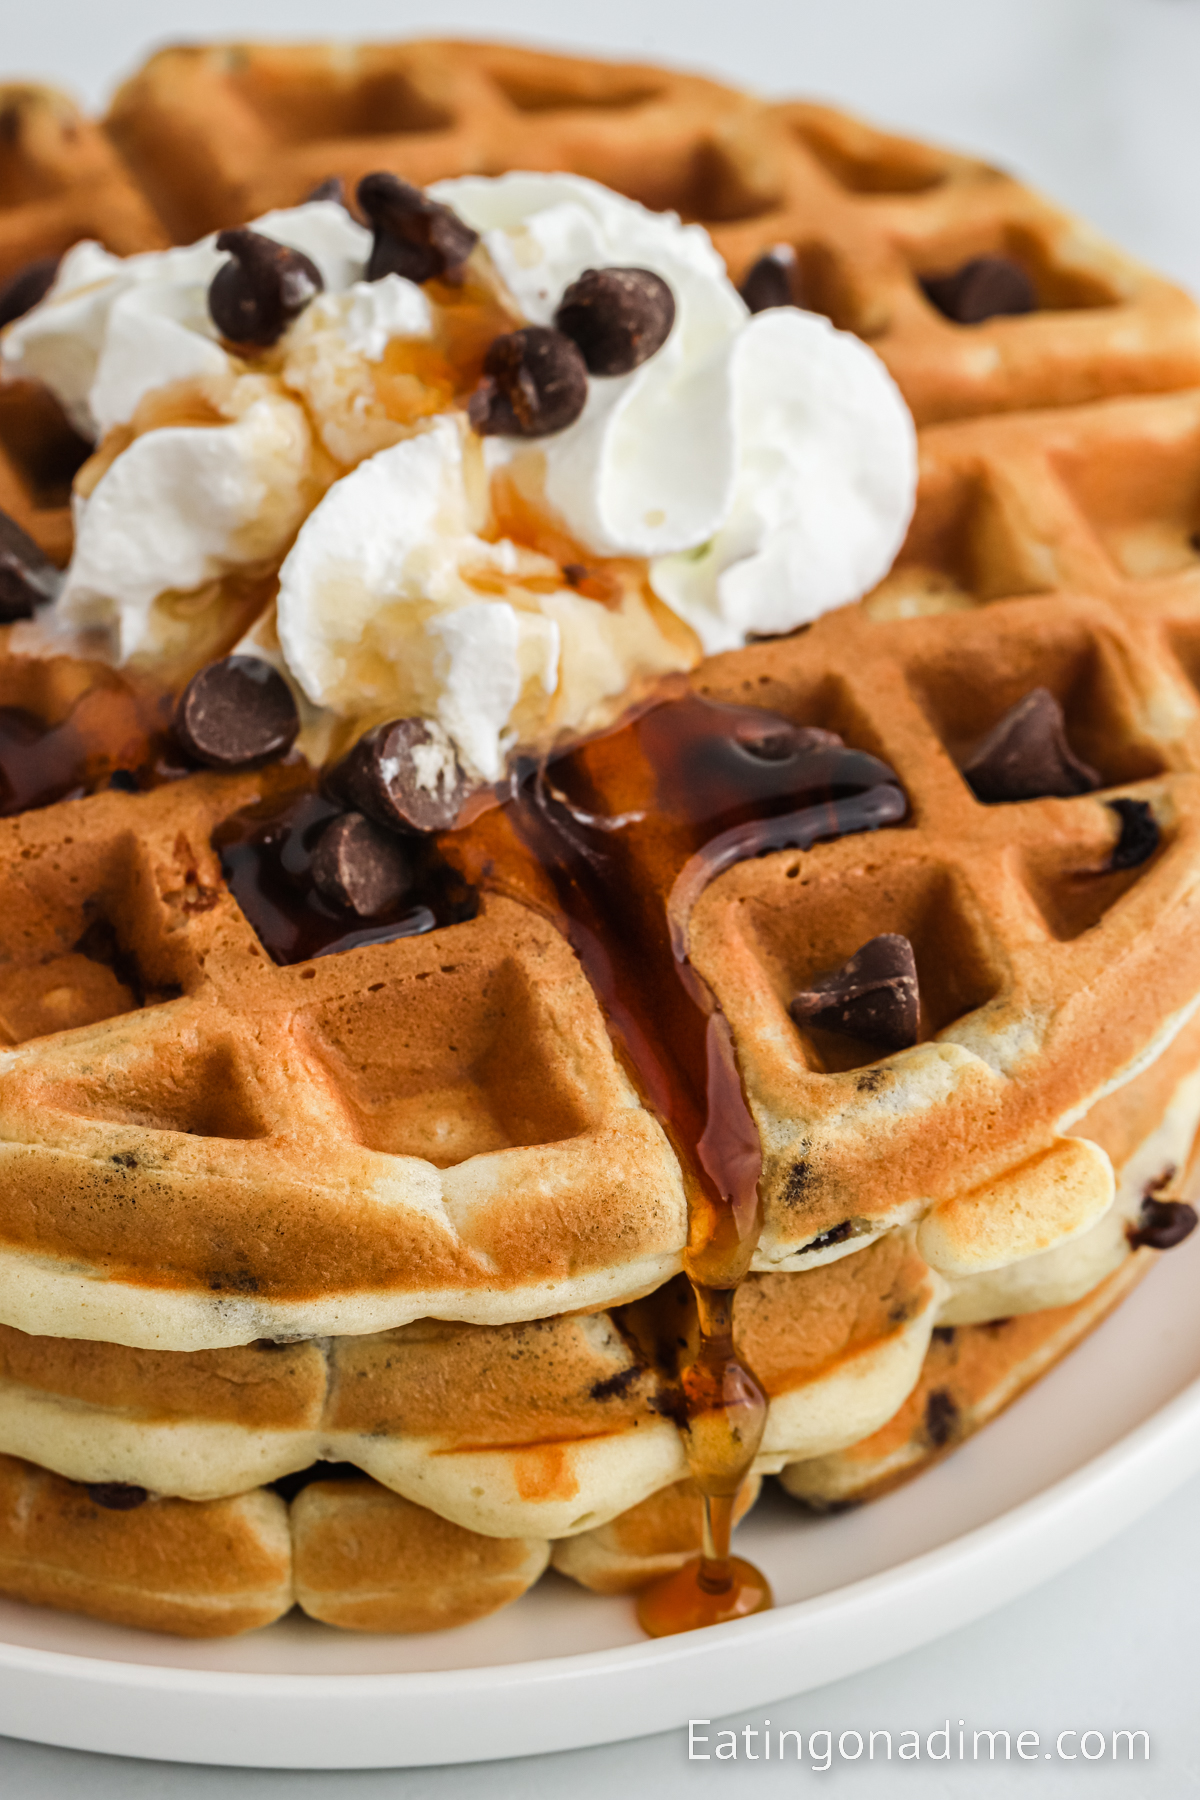 Chocolate Chip Waffles topped with chocolate chips, whipped cream and syrup